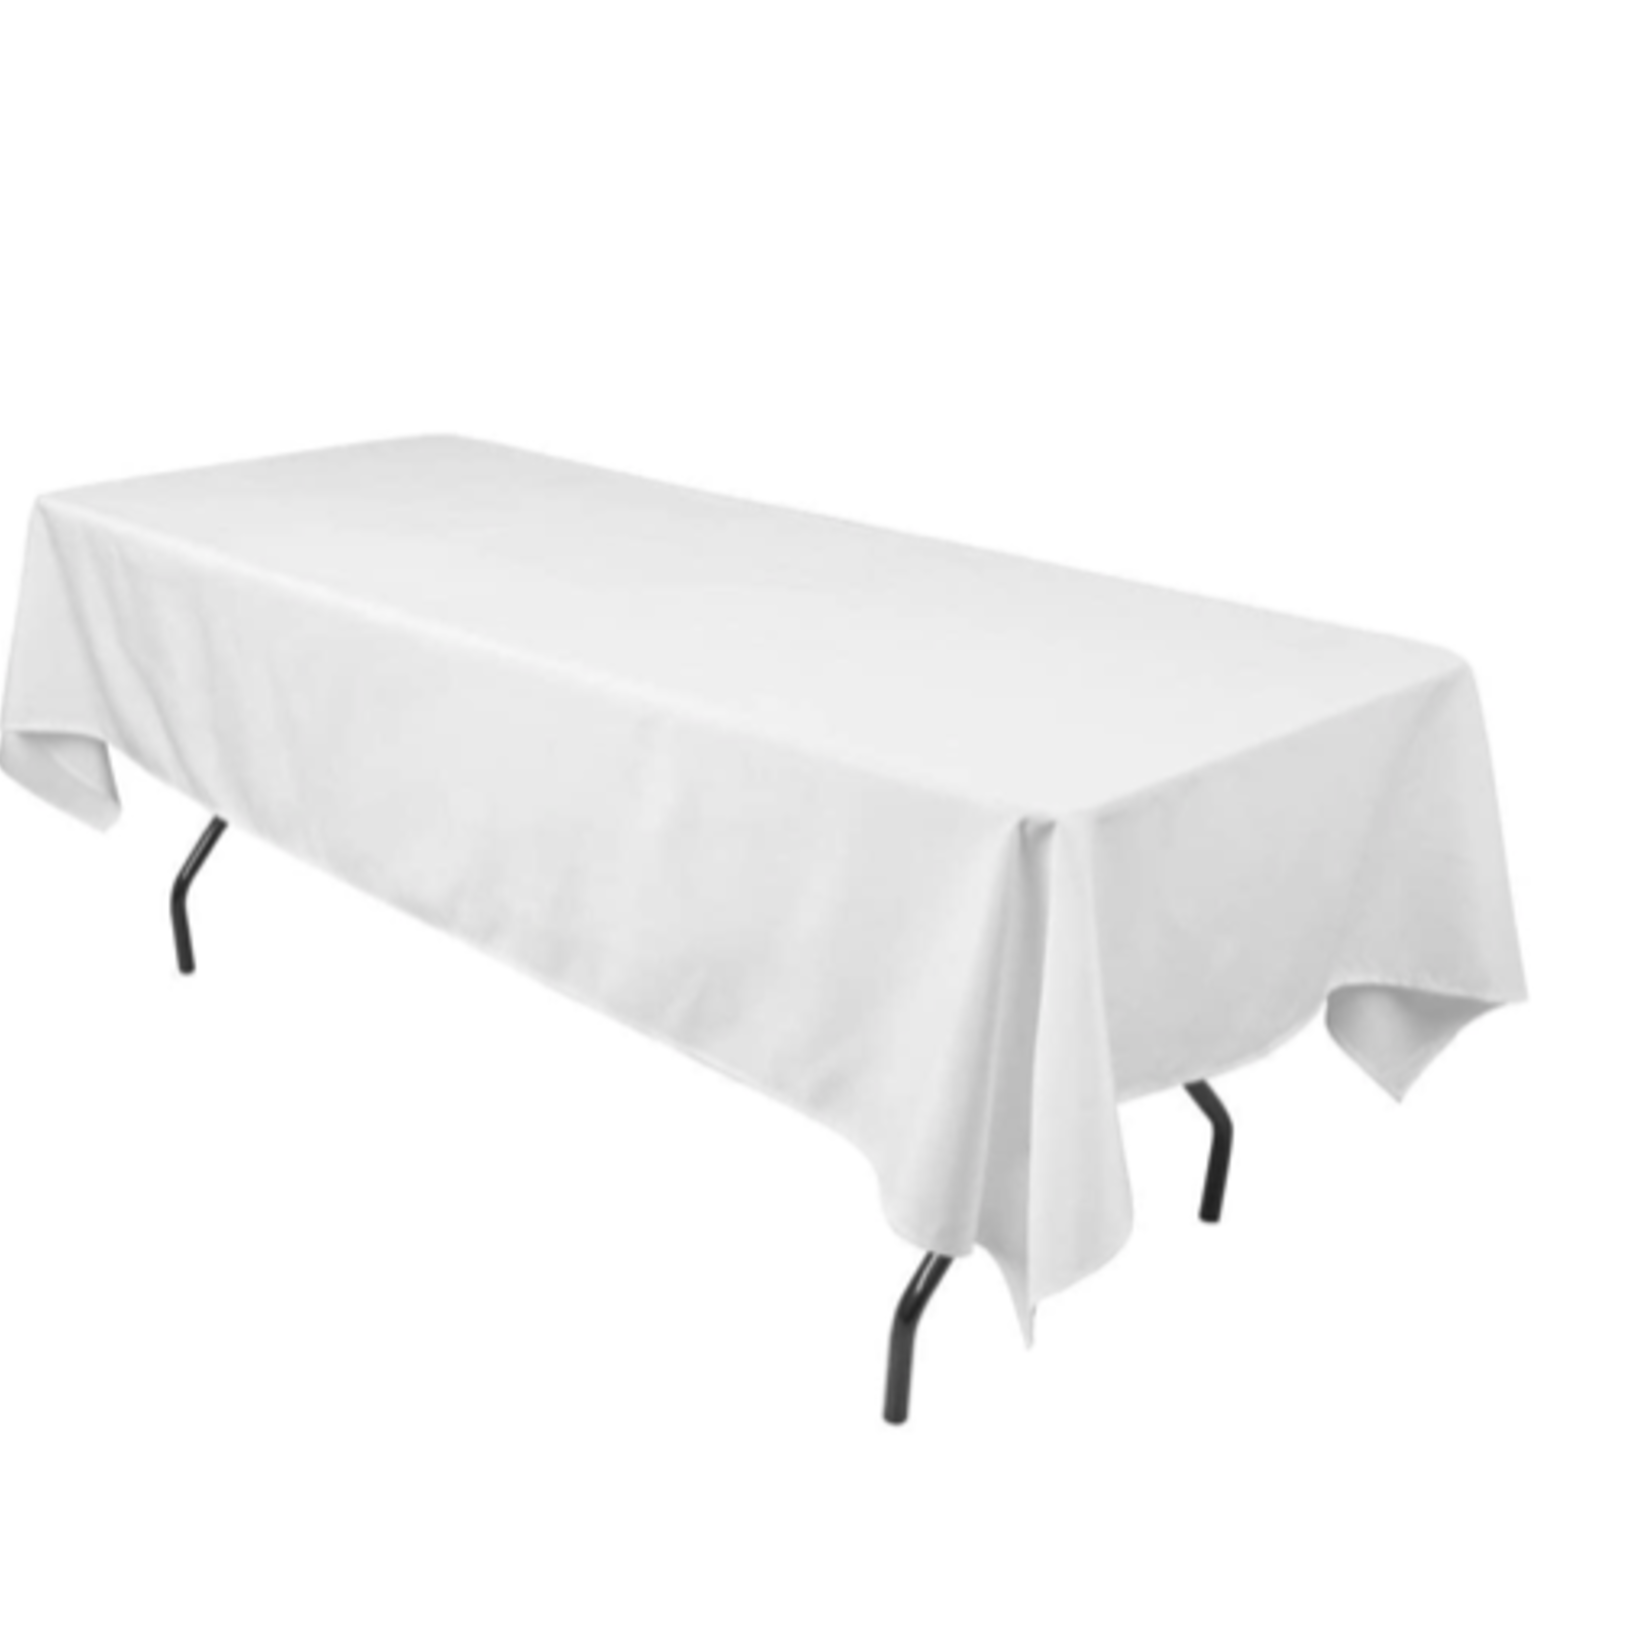 56" X 110" WHITE RECTANGLE POLYESTER TABLECLOTH, 1 PC/PACK